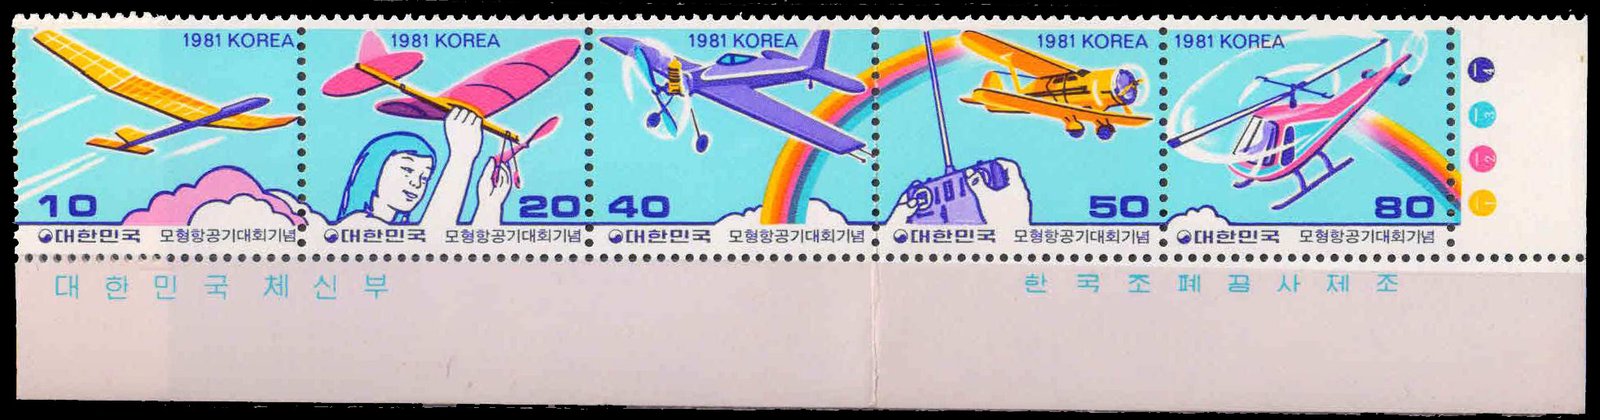 SOUTH KOREA 1981-Aeronautic Competition, Glider, Airplane, Helicopter, Set of 5, MNH, S.G. 1487-91